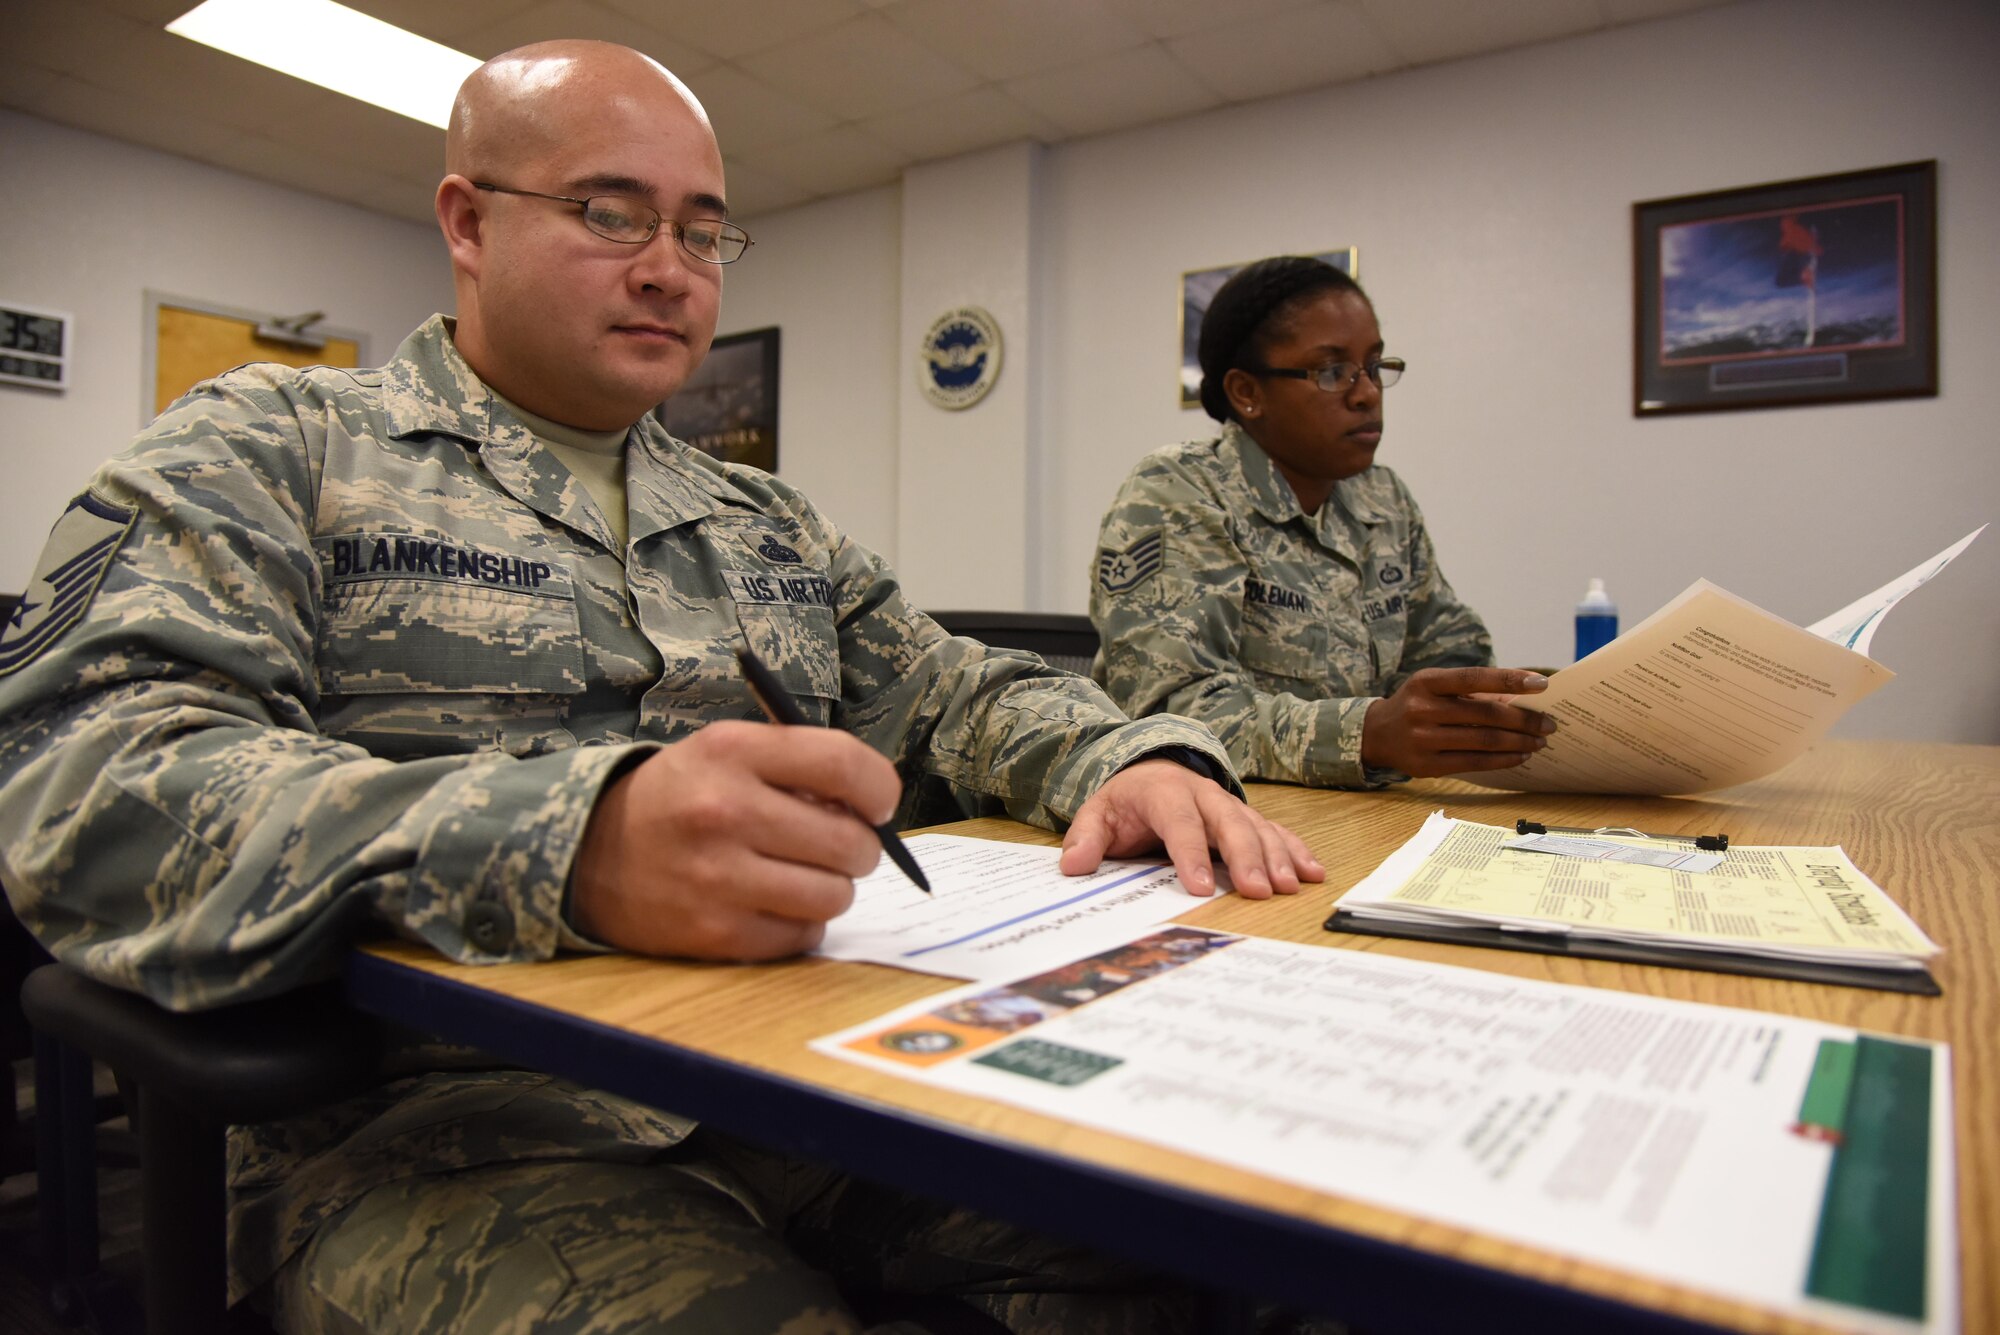 Master Sgt. William Blankenship, 338th Training Squadron instructor, and Staff Sgt. Tiffany Coleman, 335th TRS instructor, reviews dietary plans during a Better Body. Better Life. class at the Professional Development Center Nov. 9, 2016, on Keesler Air Force Base, Miss. The program is designed to help individuals lose and maintain their weight and enjoy an overall healthy lifestyle. Classes are currently offered each quarter depending on participation. For more information call 228-376-3171. (U.S. Air Force photo by Kemberly Groue/Released)